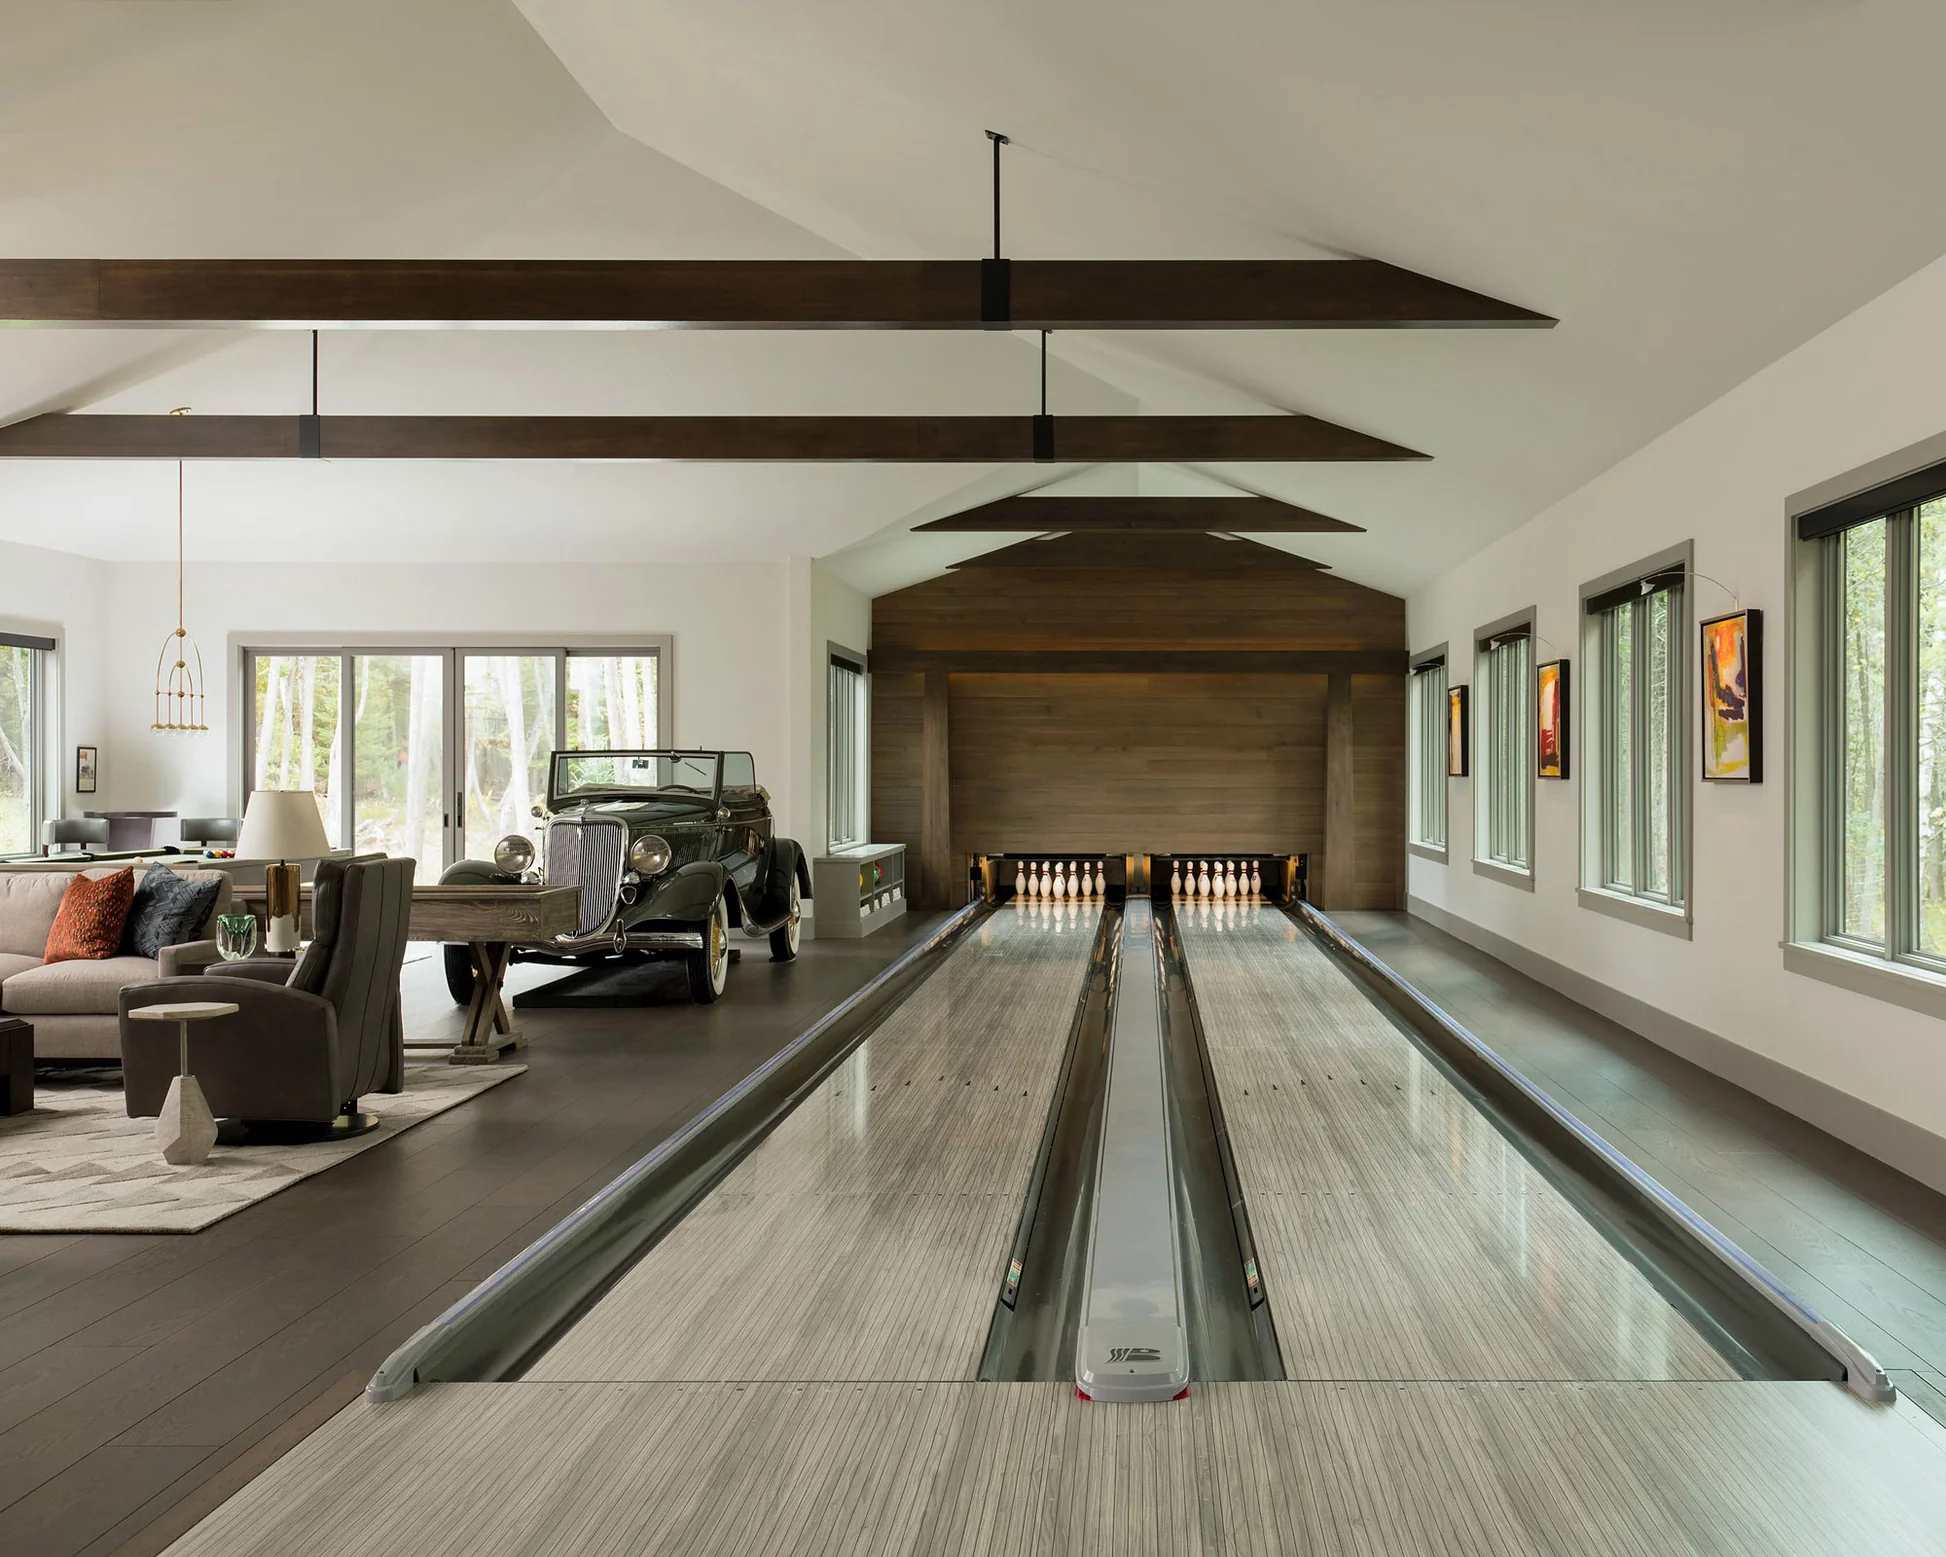 Living room with a bowling alley and a car, with brown hues